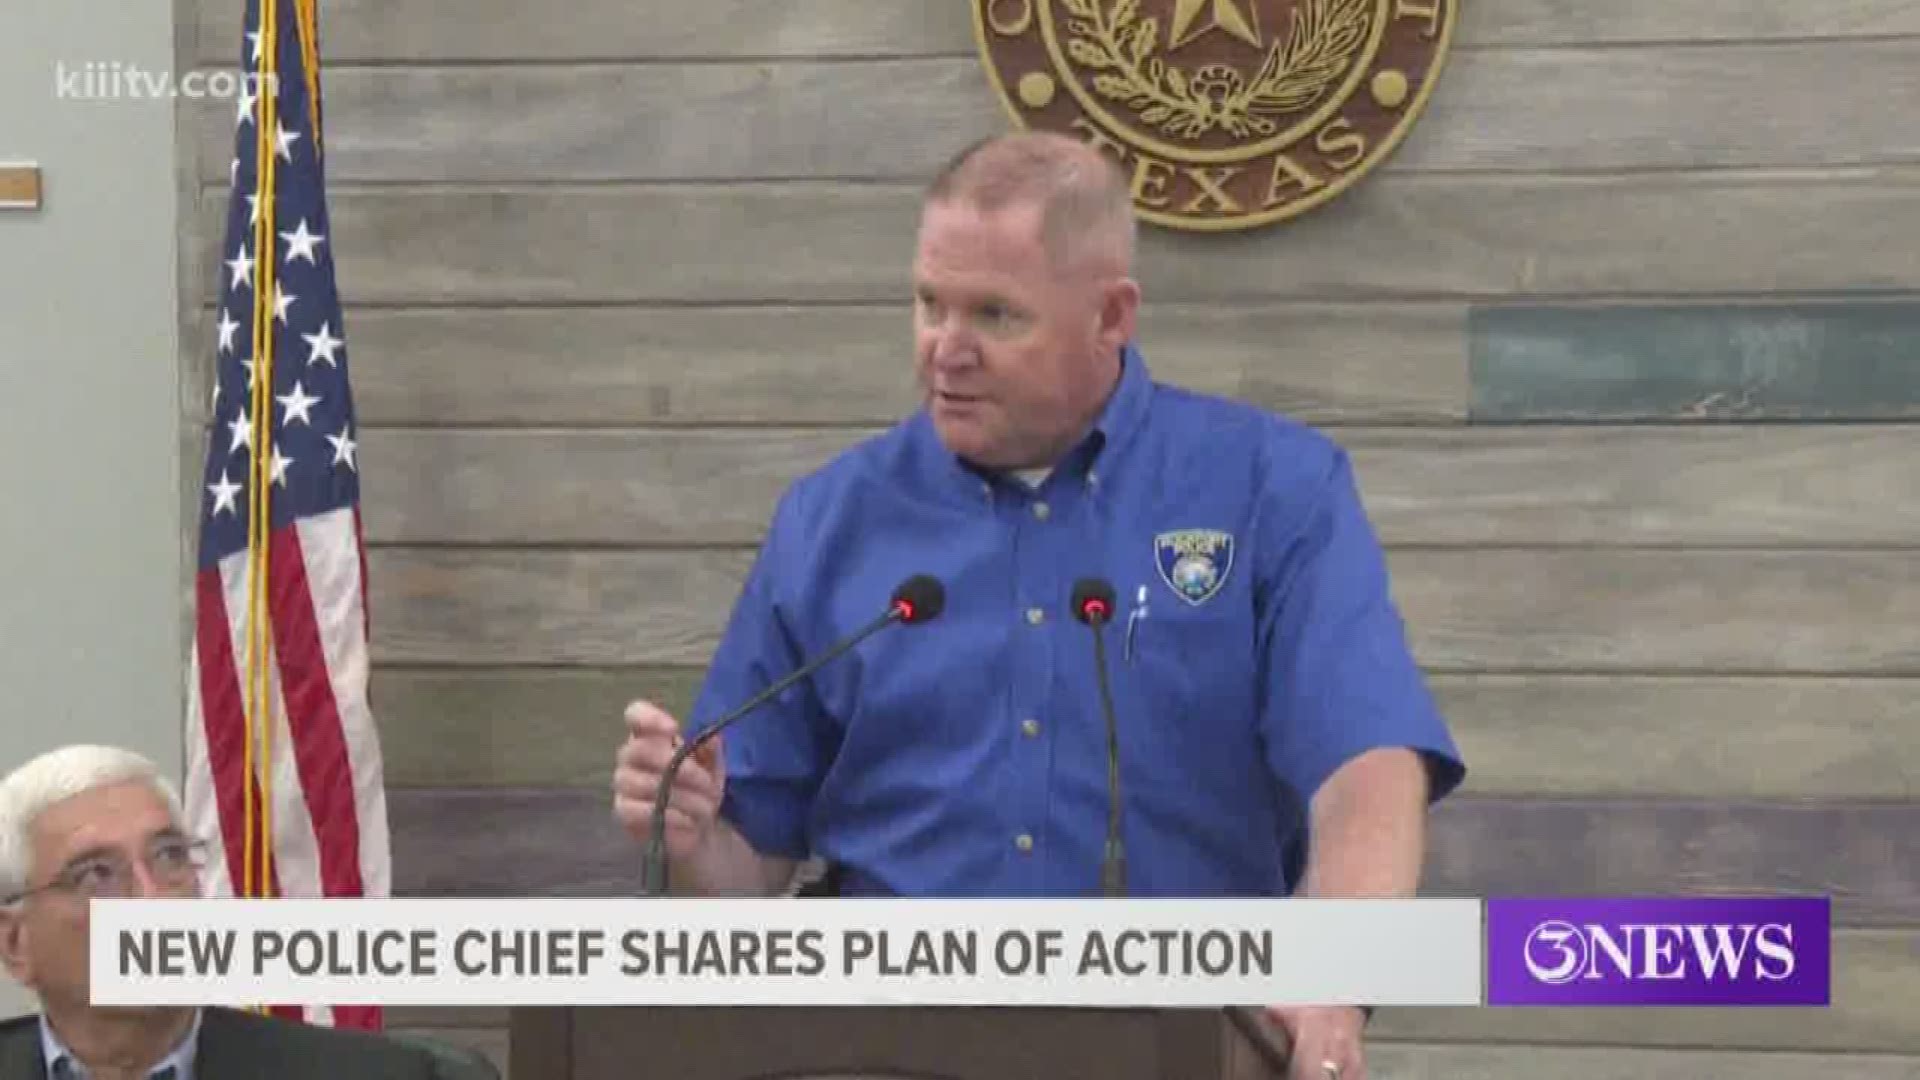 The new police chief in Rockport, Texas, is officially on the job and is already listing his priorities.